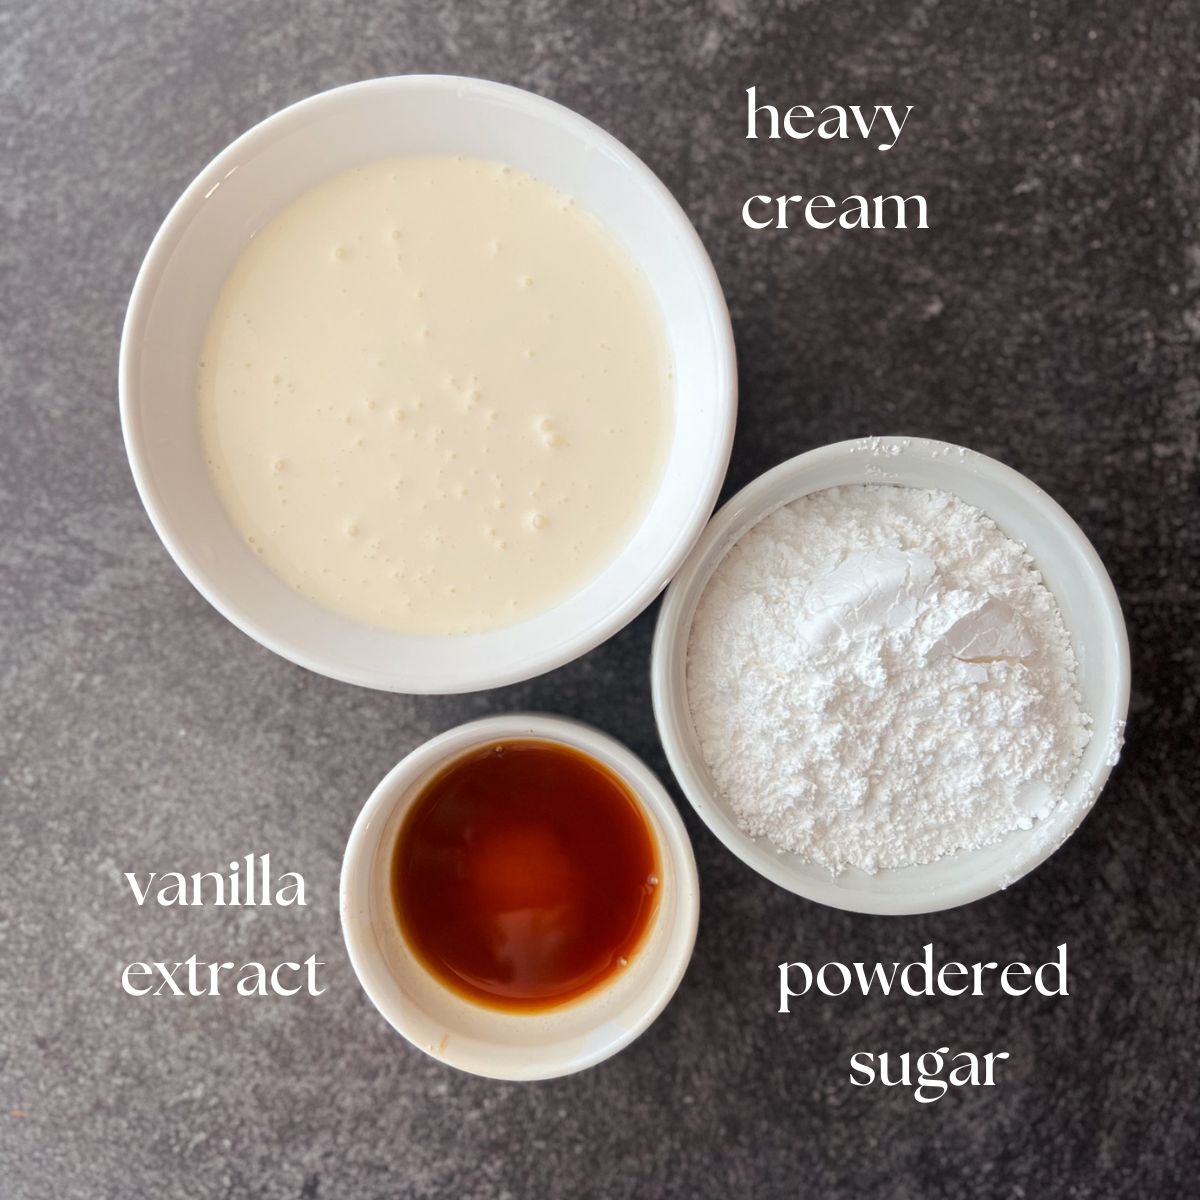 Ingredients for whipped cream frosting: heavy cream, powdered sugar, and vanilla extract.